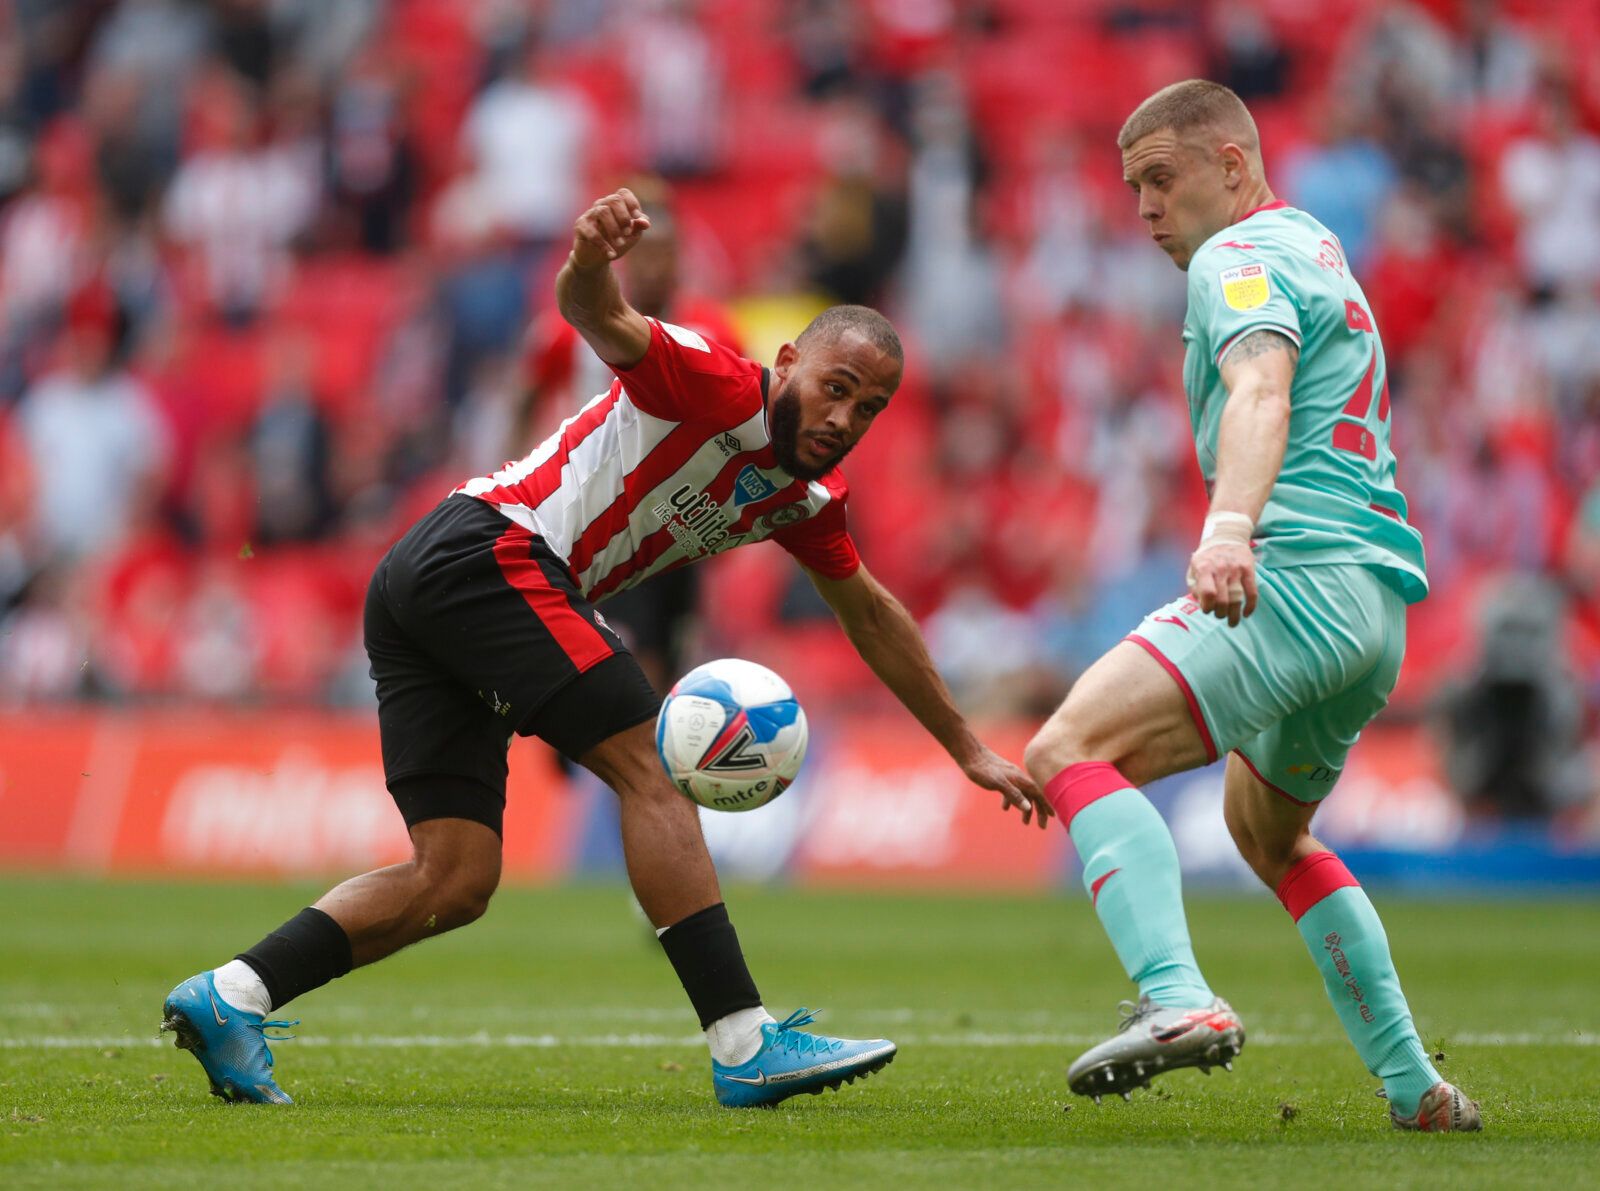 Soccer Football - Championship Play-Off Final - Brentford v Swansea City - Wembley Stadium, London, Britain - May 29, 2021 Brentford's Bryan Mbeumo in action with Swansea City's Jake Bidwell Action Images via Reuters/Matthew Childs